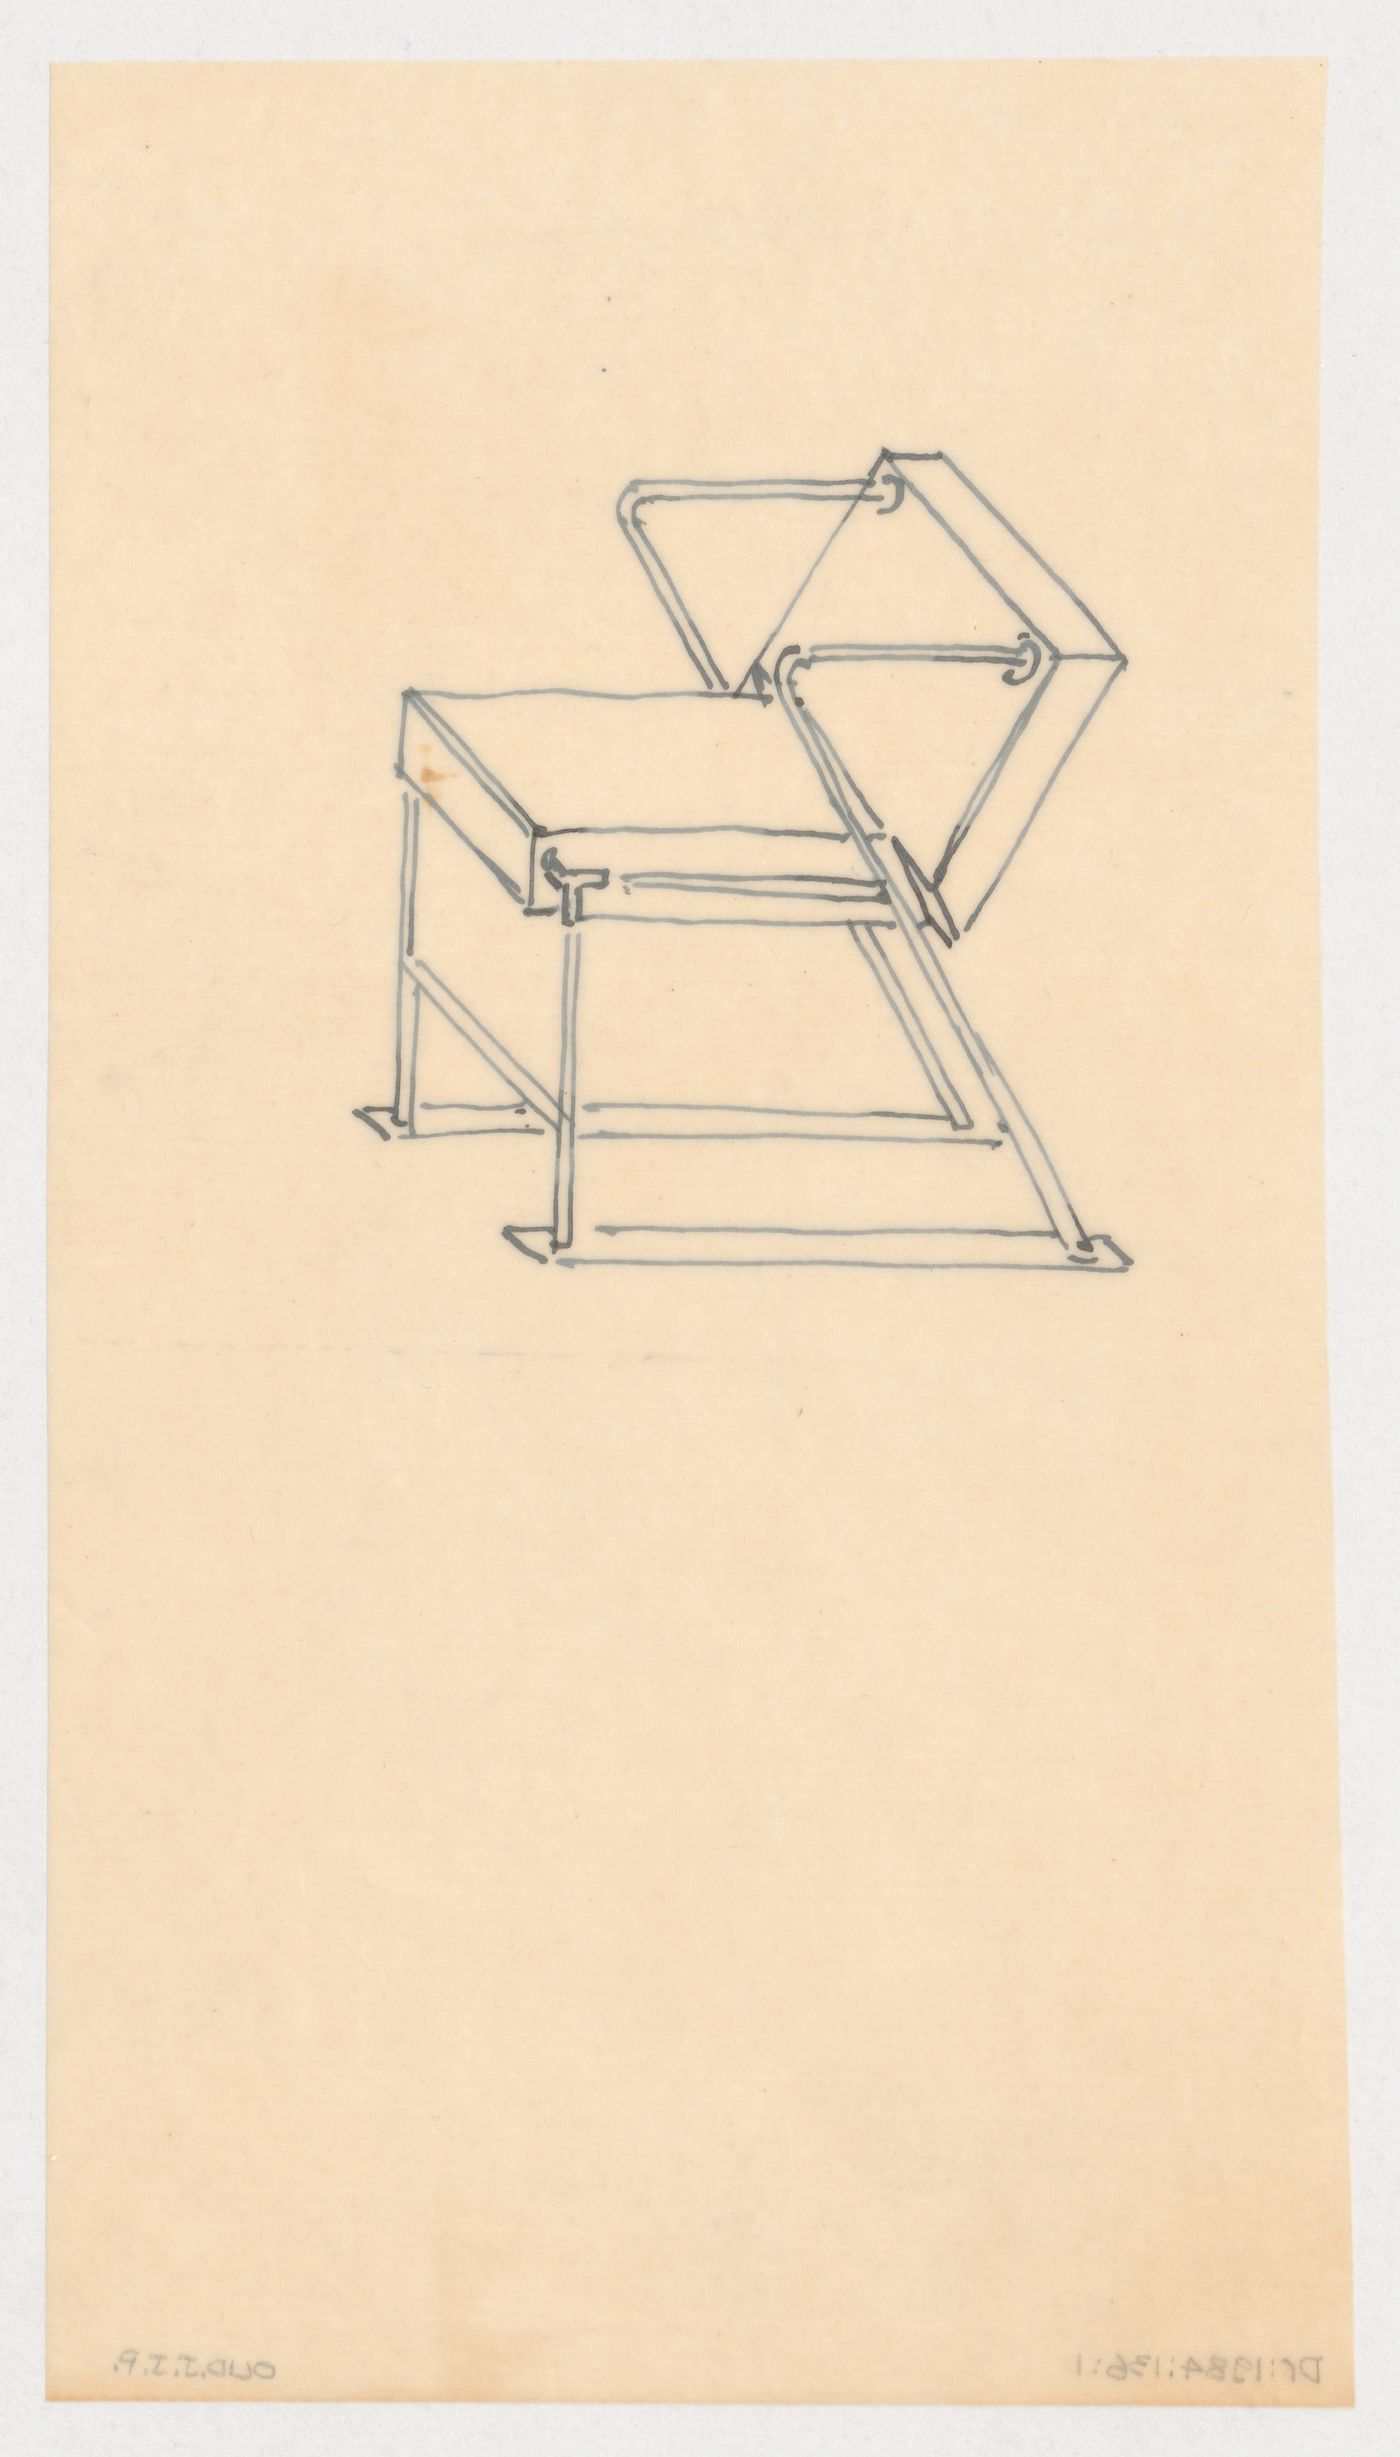 Sketch perspective for chairs, possibly for Metz & Co., Amsterdam, Netherlands